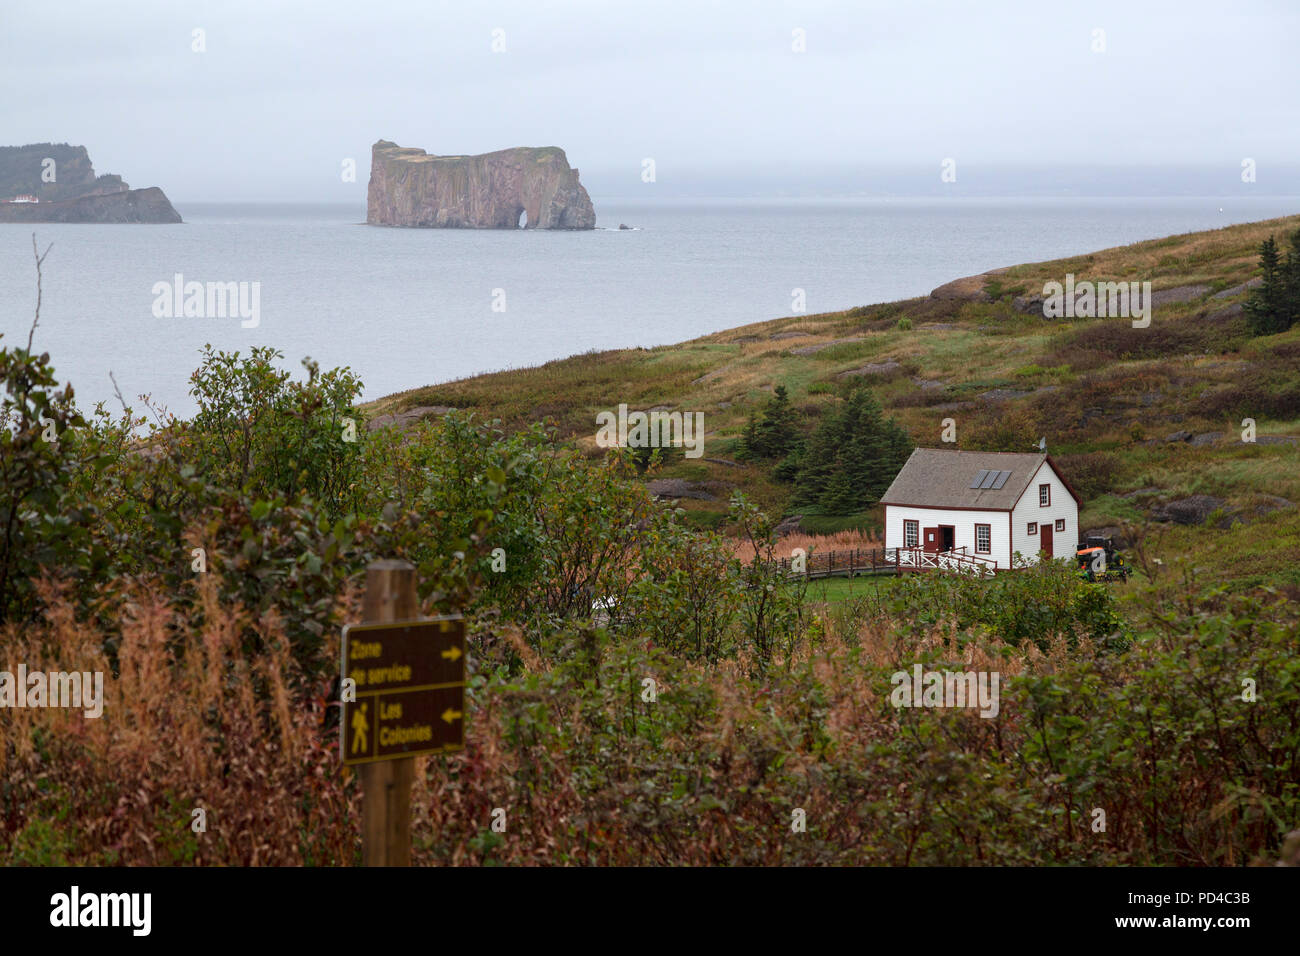 Cafe on Bonaventure Island, Canada. Perce Rock can be seen in the background, in the Gulf of St Lawrence. Stock Photo